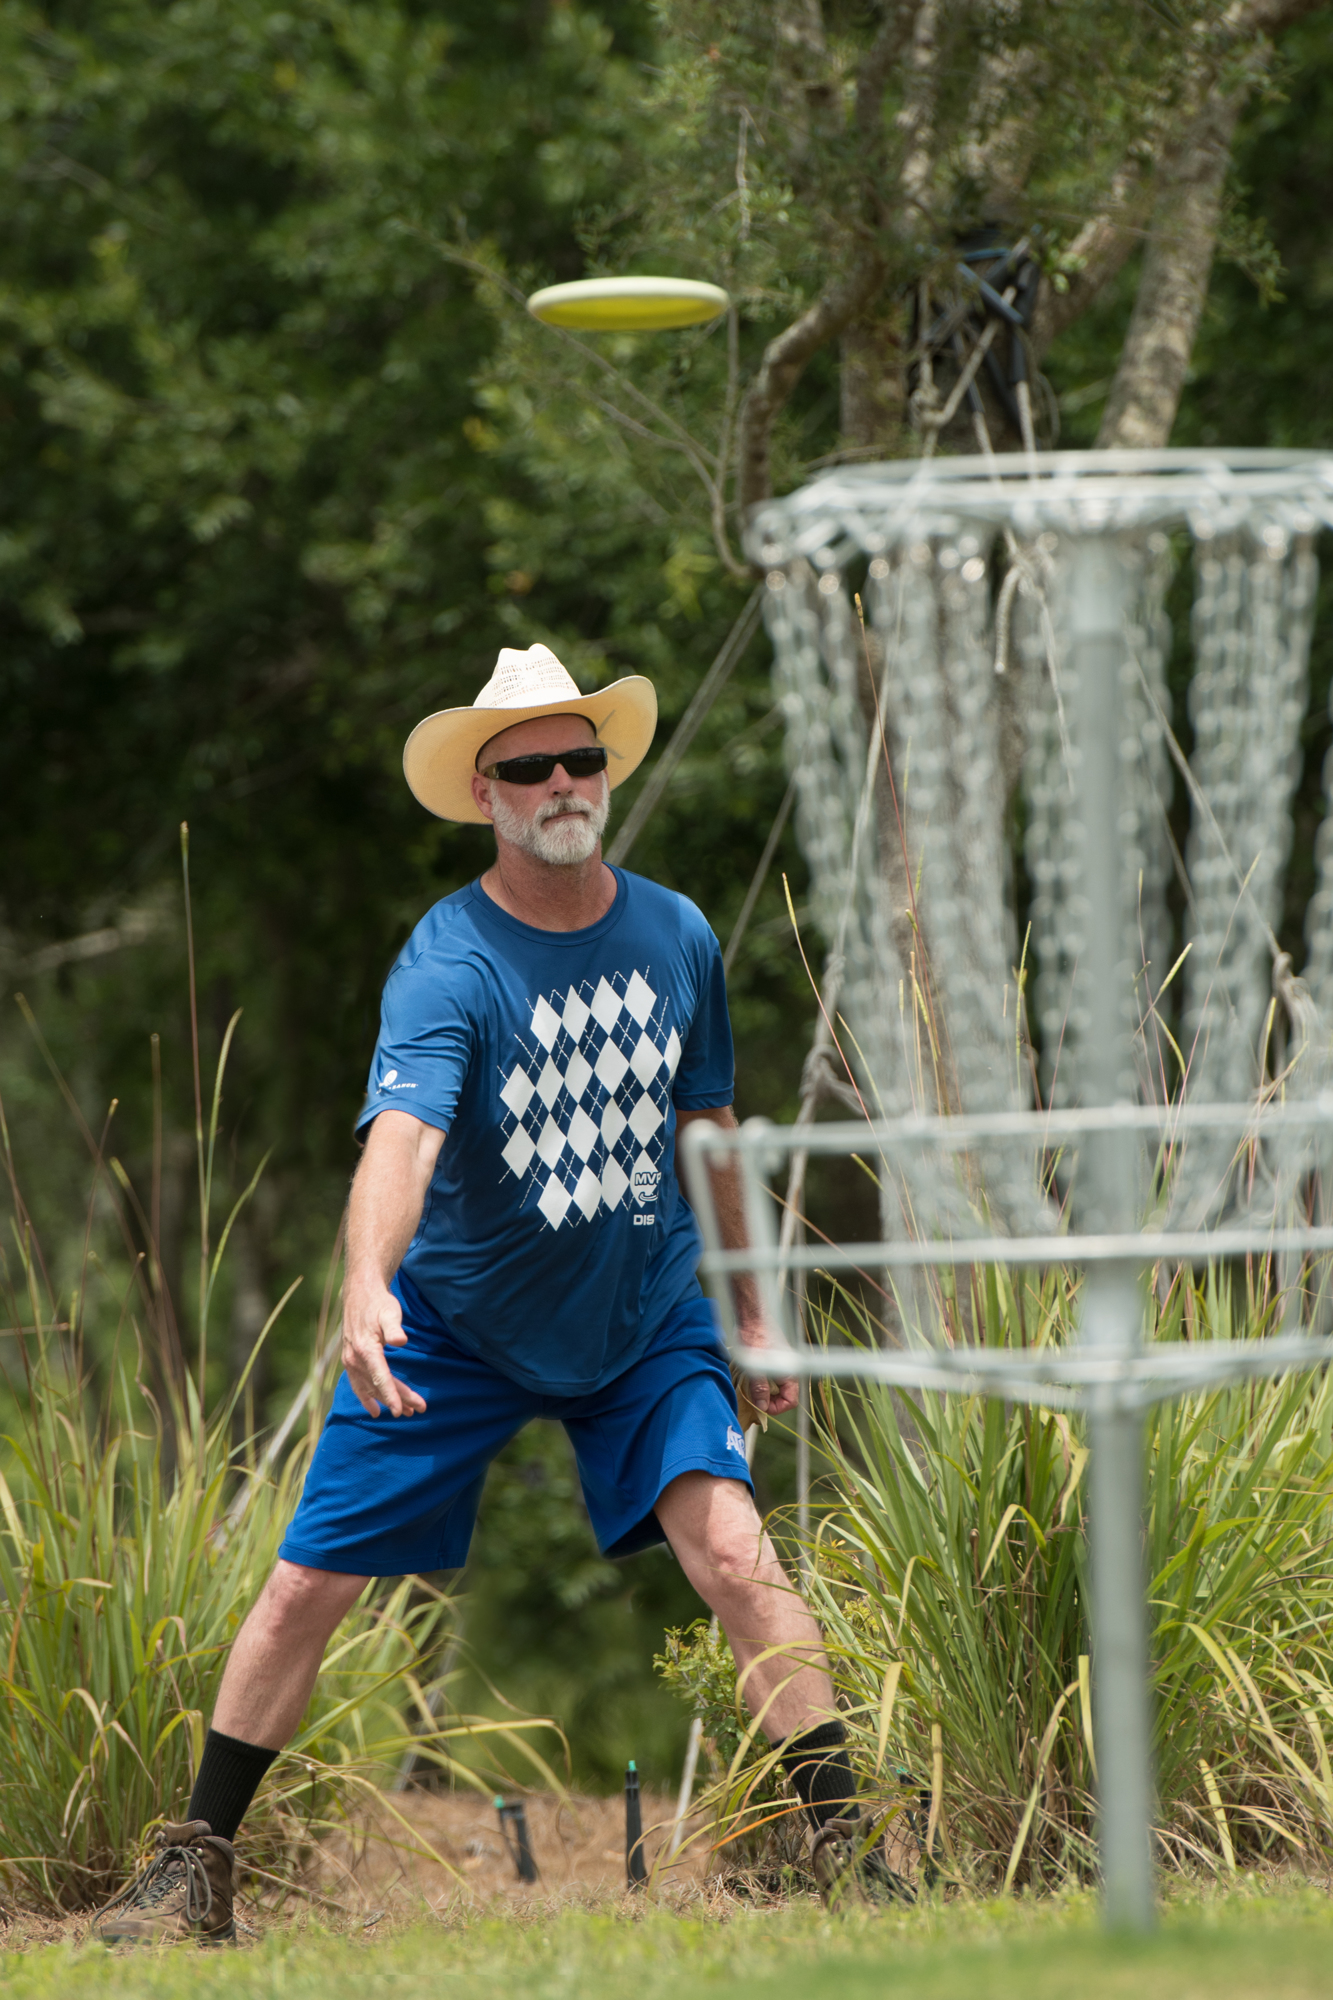 Elkin Mosely plays disc golf in MVP Sports and Social's league. Disc golf can also be played at Payne Park, North Water Tower Park and Lakeview Park in Sarasota. Courtesy photo.